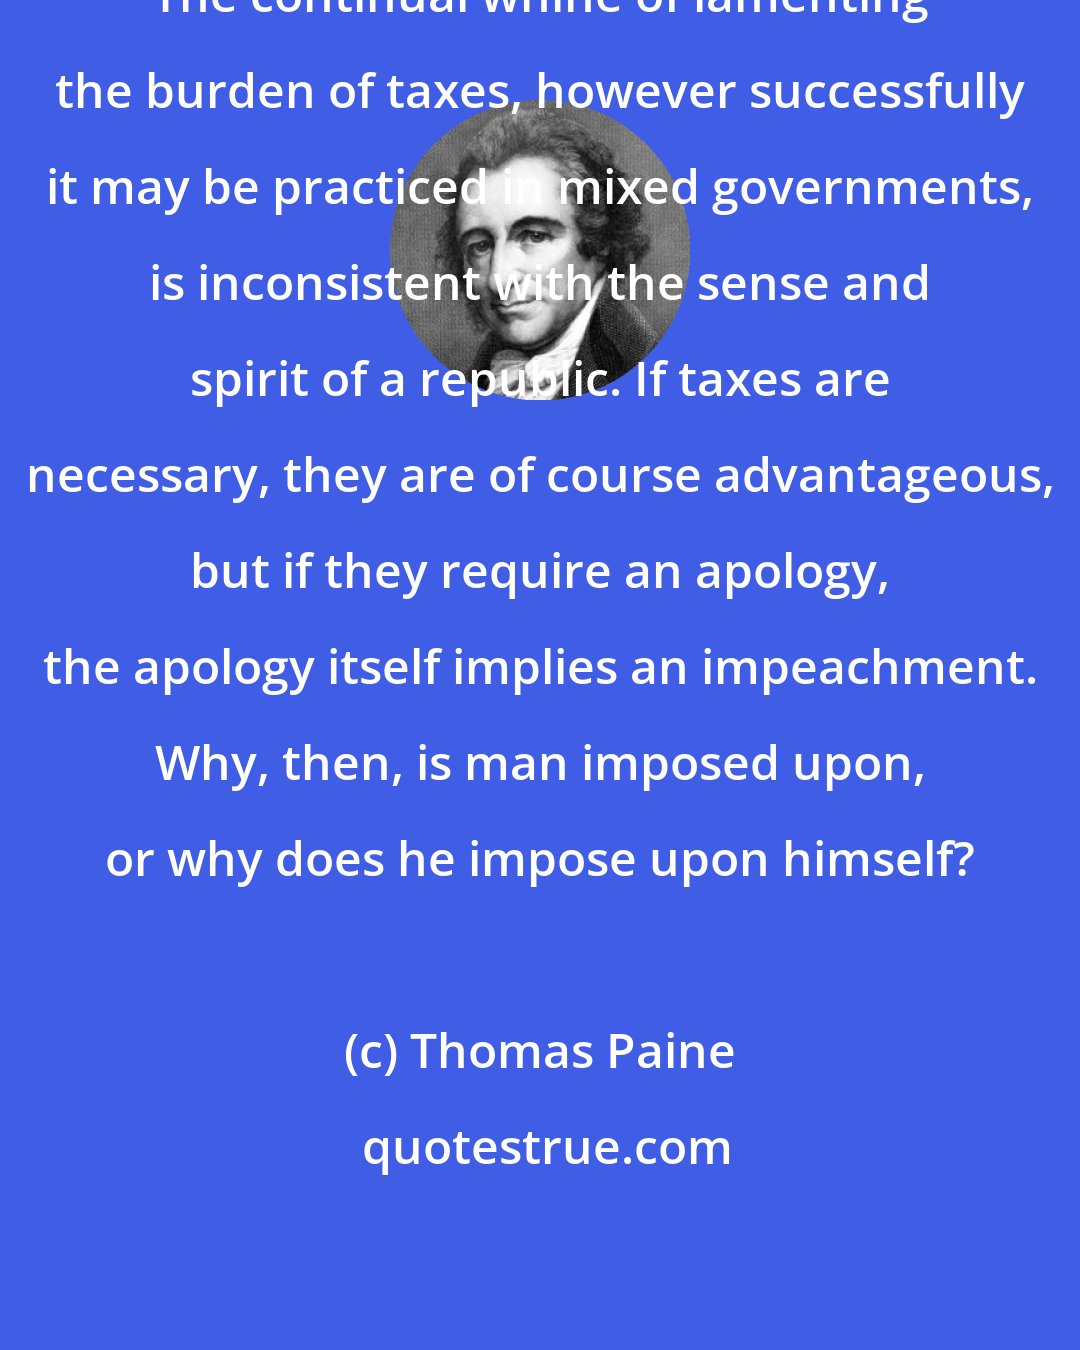 Thomas Paine: The continual whine of lamenting the burden of taxes, however successfully it may be practiced in mixed governments, is inconsistent with the sense and spirit of a republic. If taxes are necessary, they are of course advantageous, but if they require an apology, the apology itself implies an impeachment. Why, then, is man imposed upon, or why does he impose upon himself?